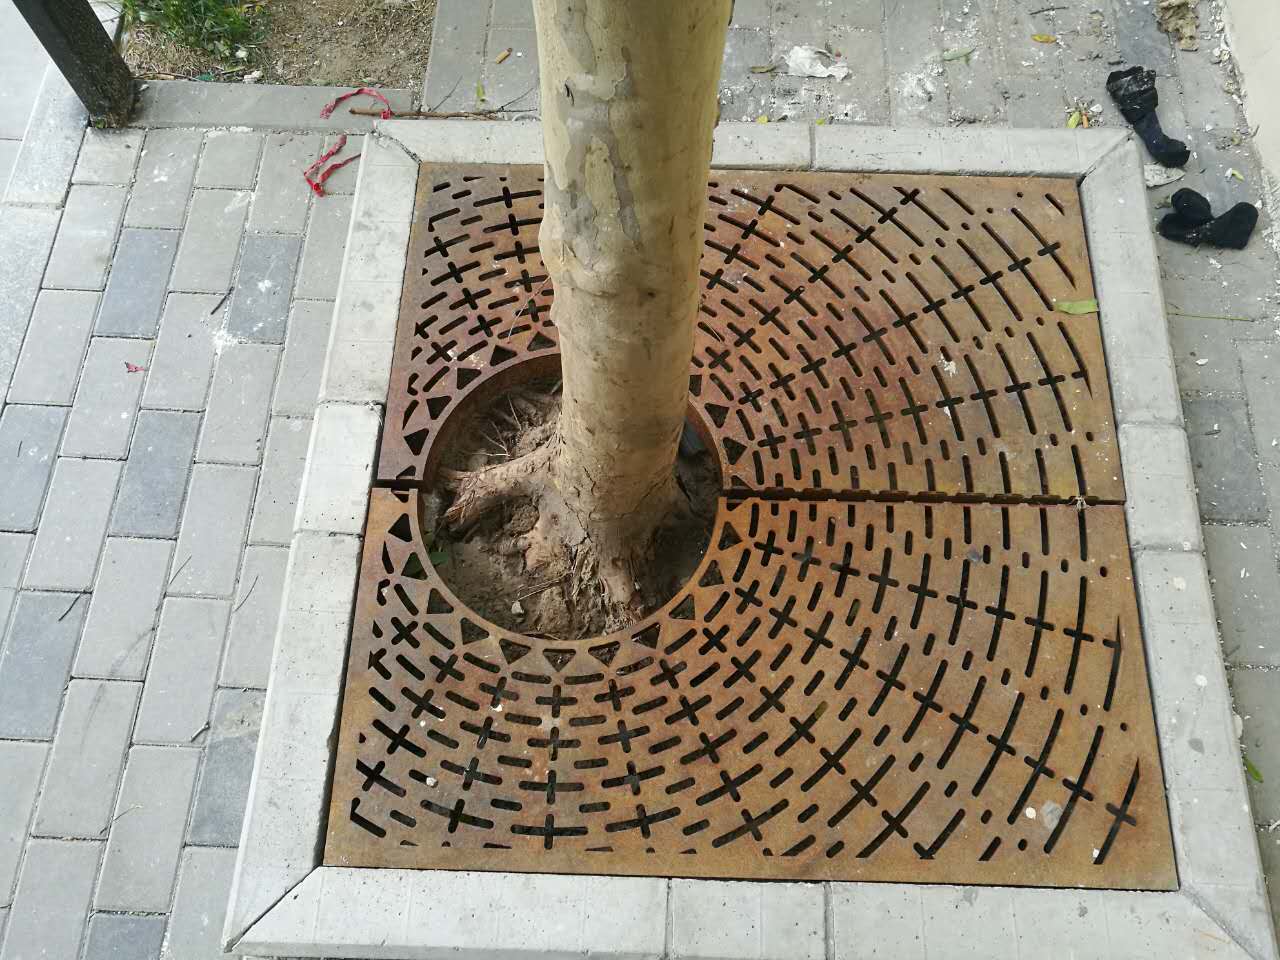 How tree grates is becoming a better technology in urban cities